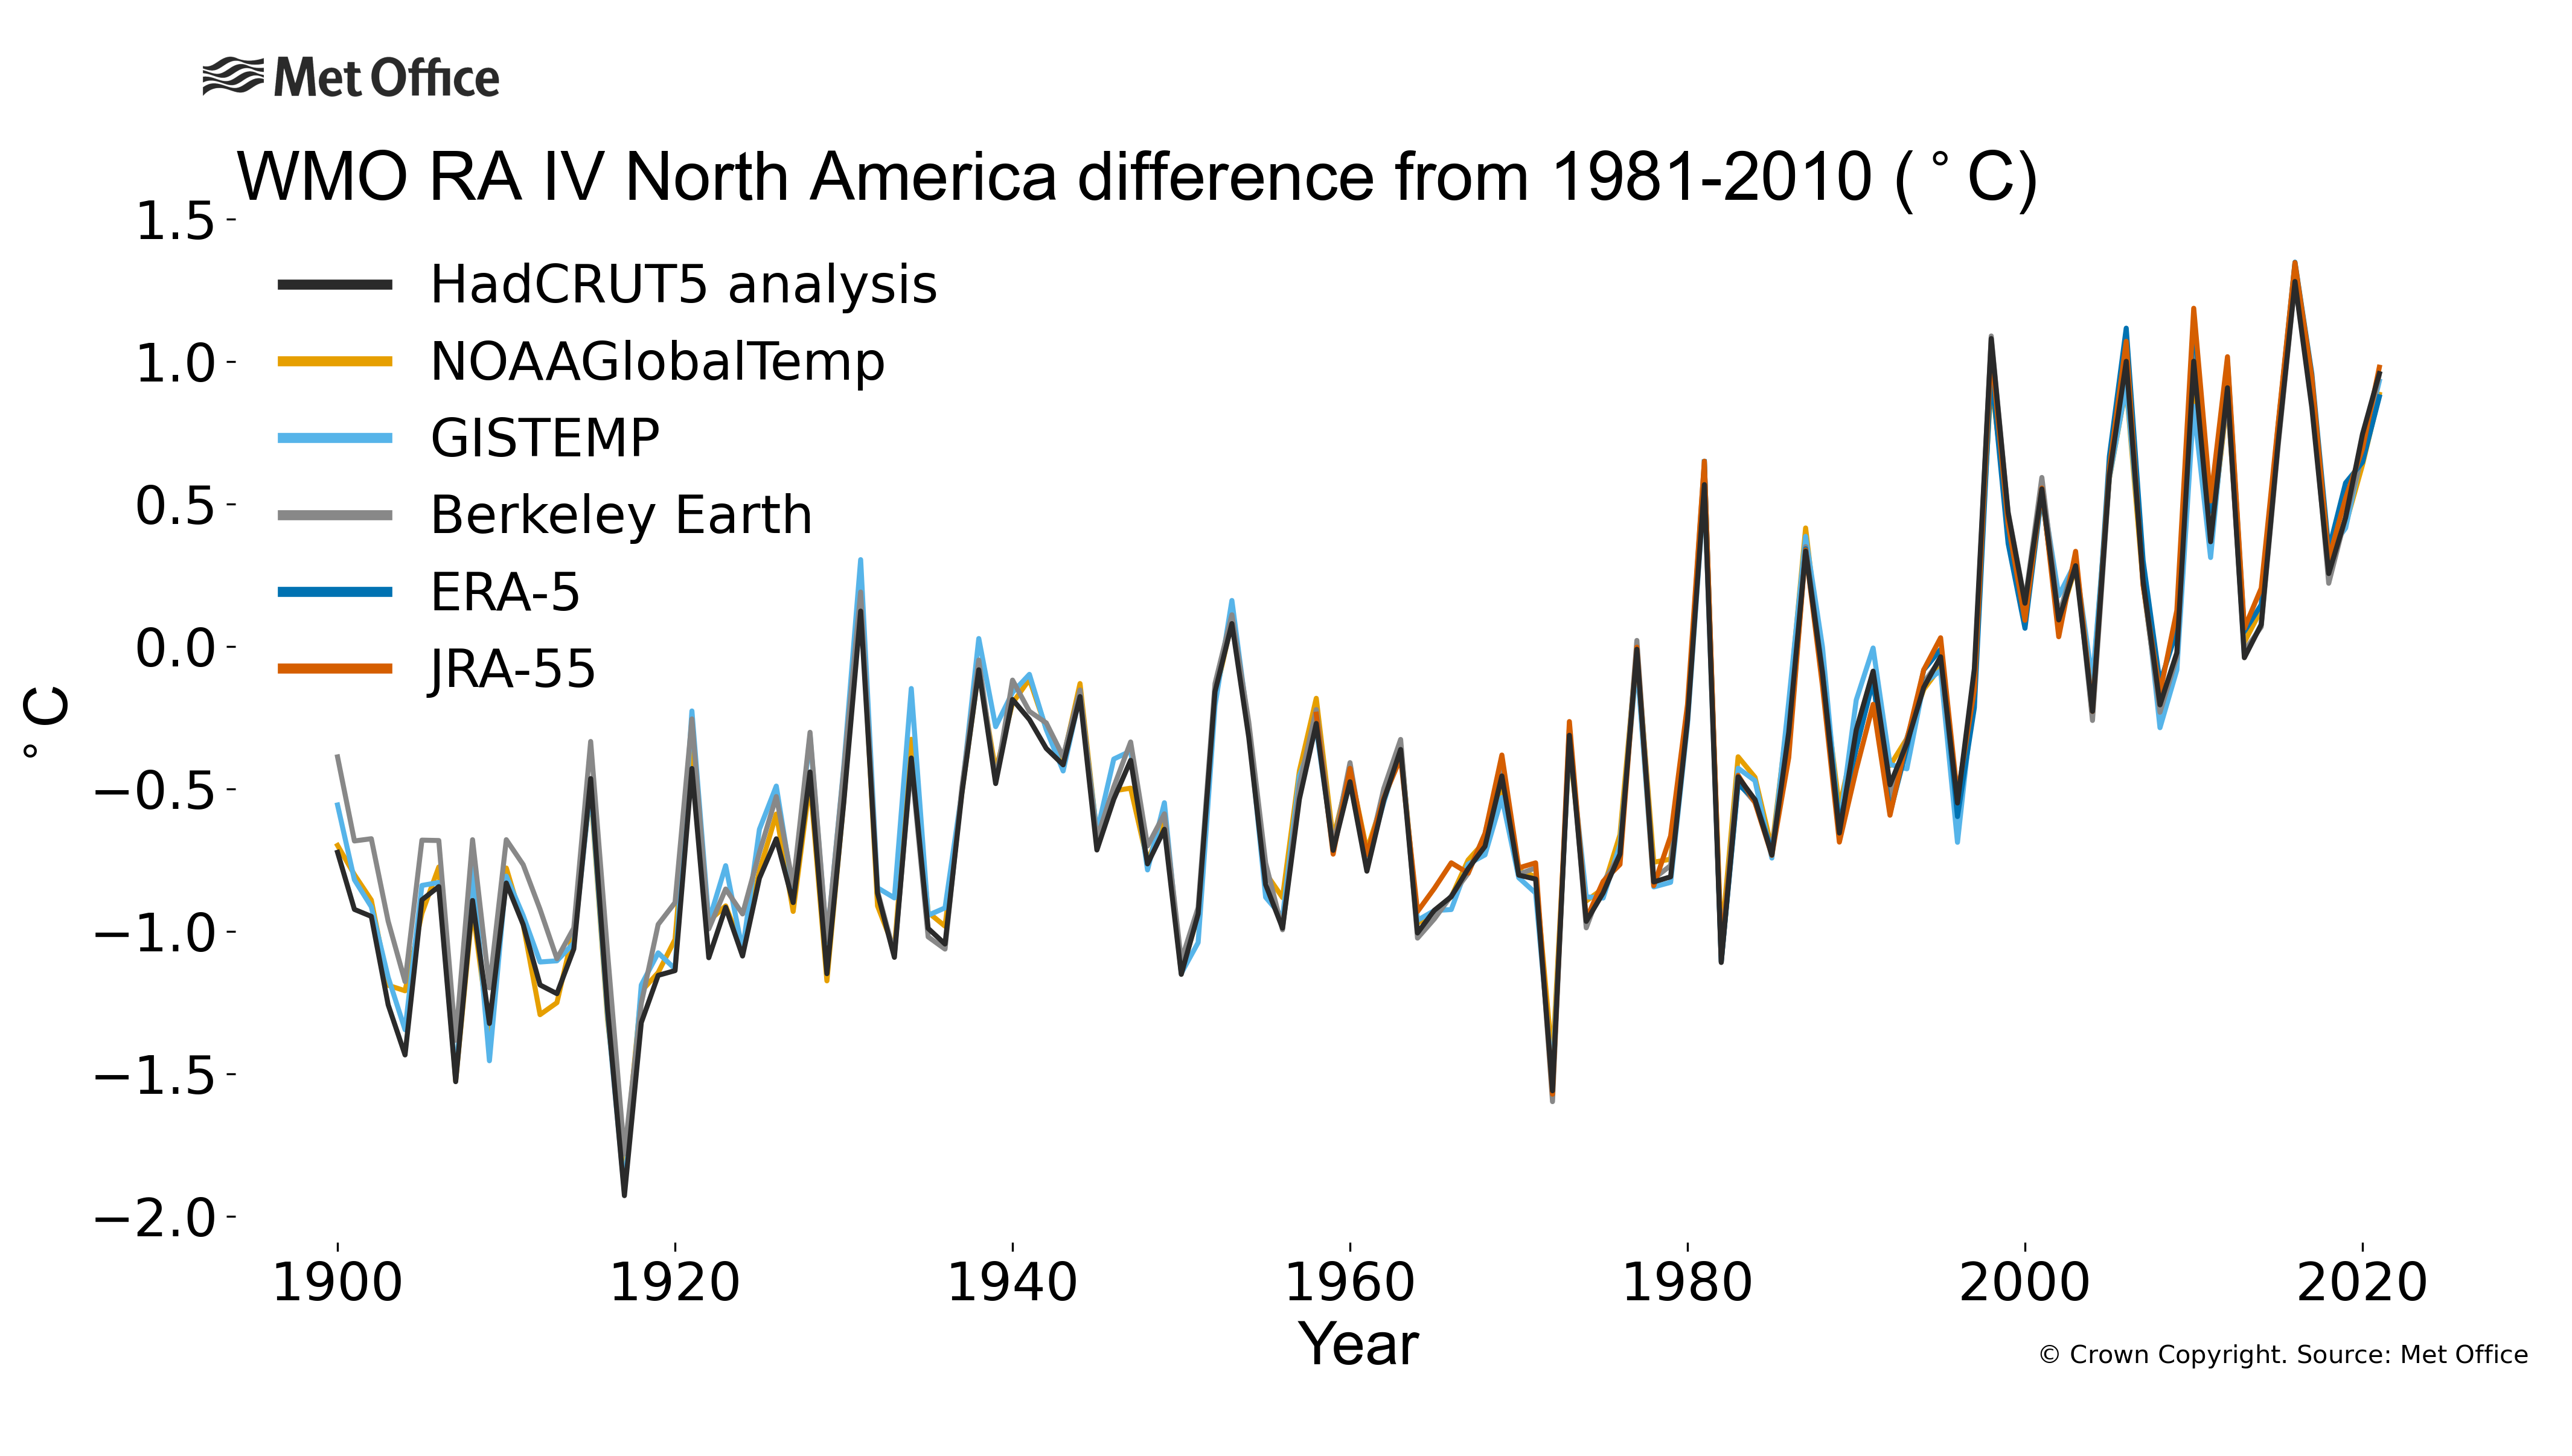 
The plot shows annual average temperature anomalies (relative to 1981-2010) for WMO RA IV - North America, Central America, Caribbean. Data are from six different data sets: HadCRUT5, NOAAGlobalTemp, GISTEMP, Berkeley Earth, ERA5 and JRA55.
